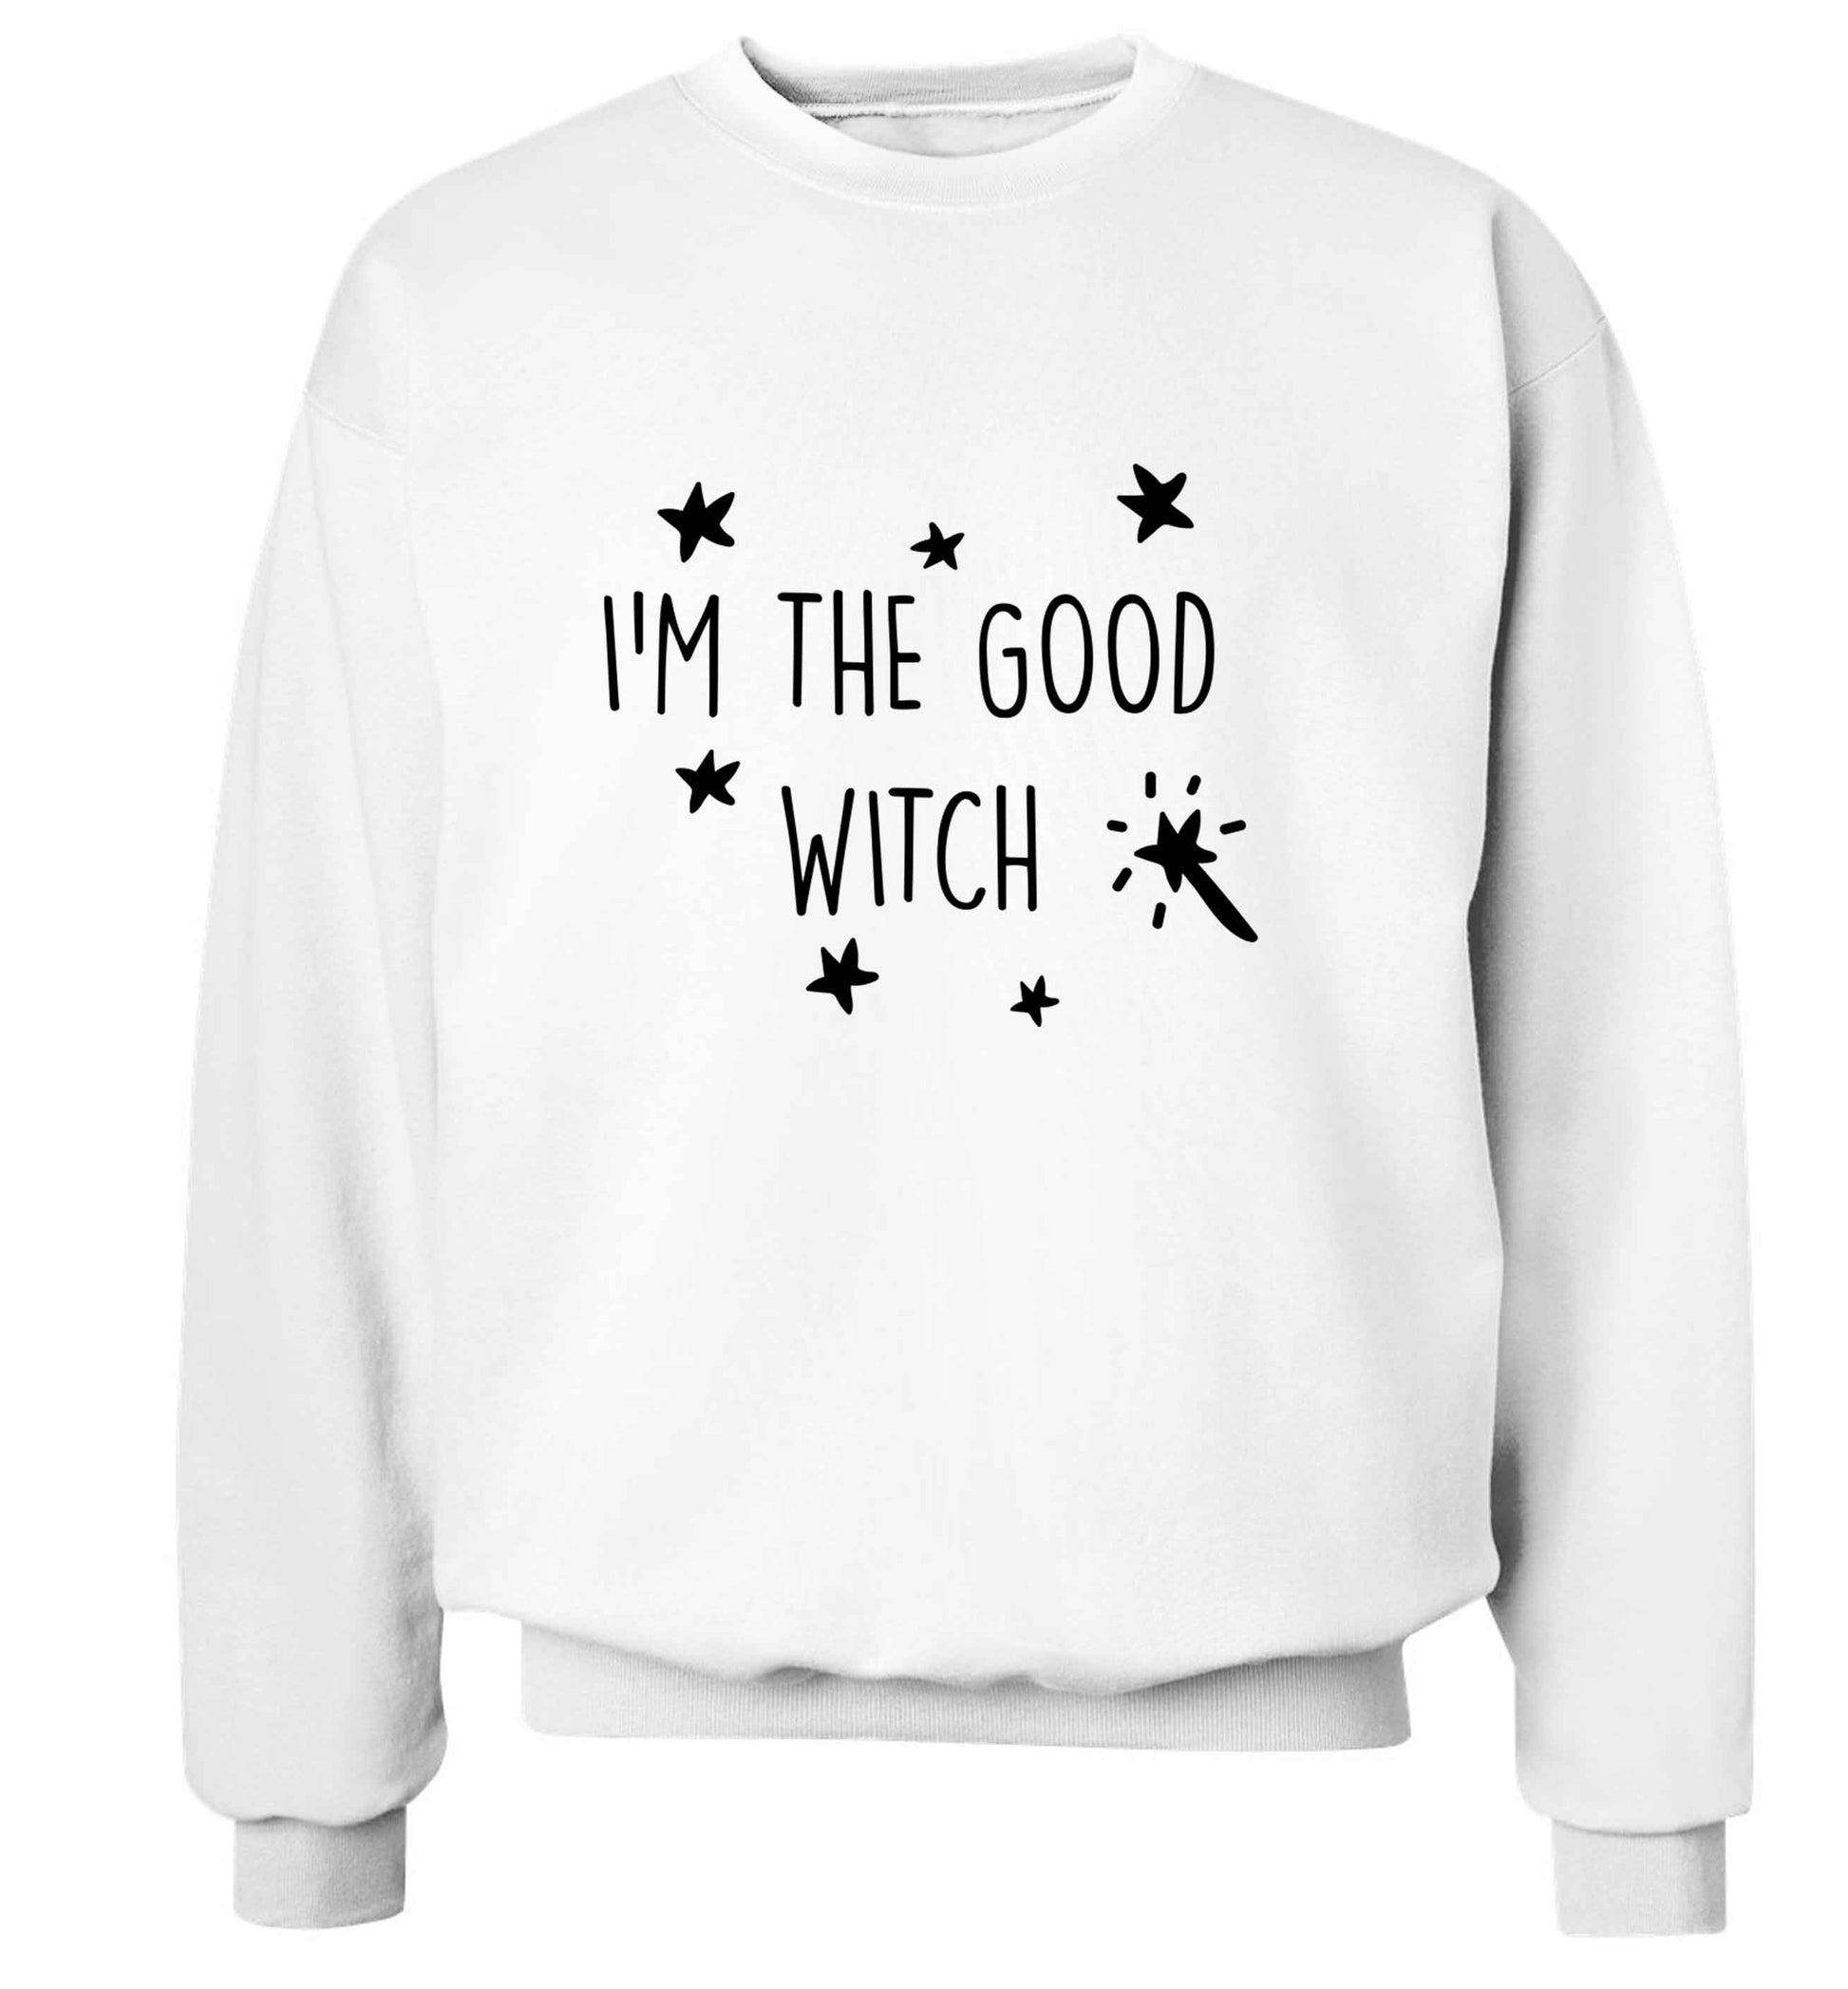 Good witch adult's unisex white sweater 2XL